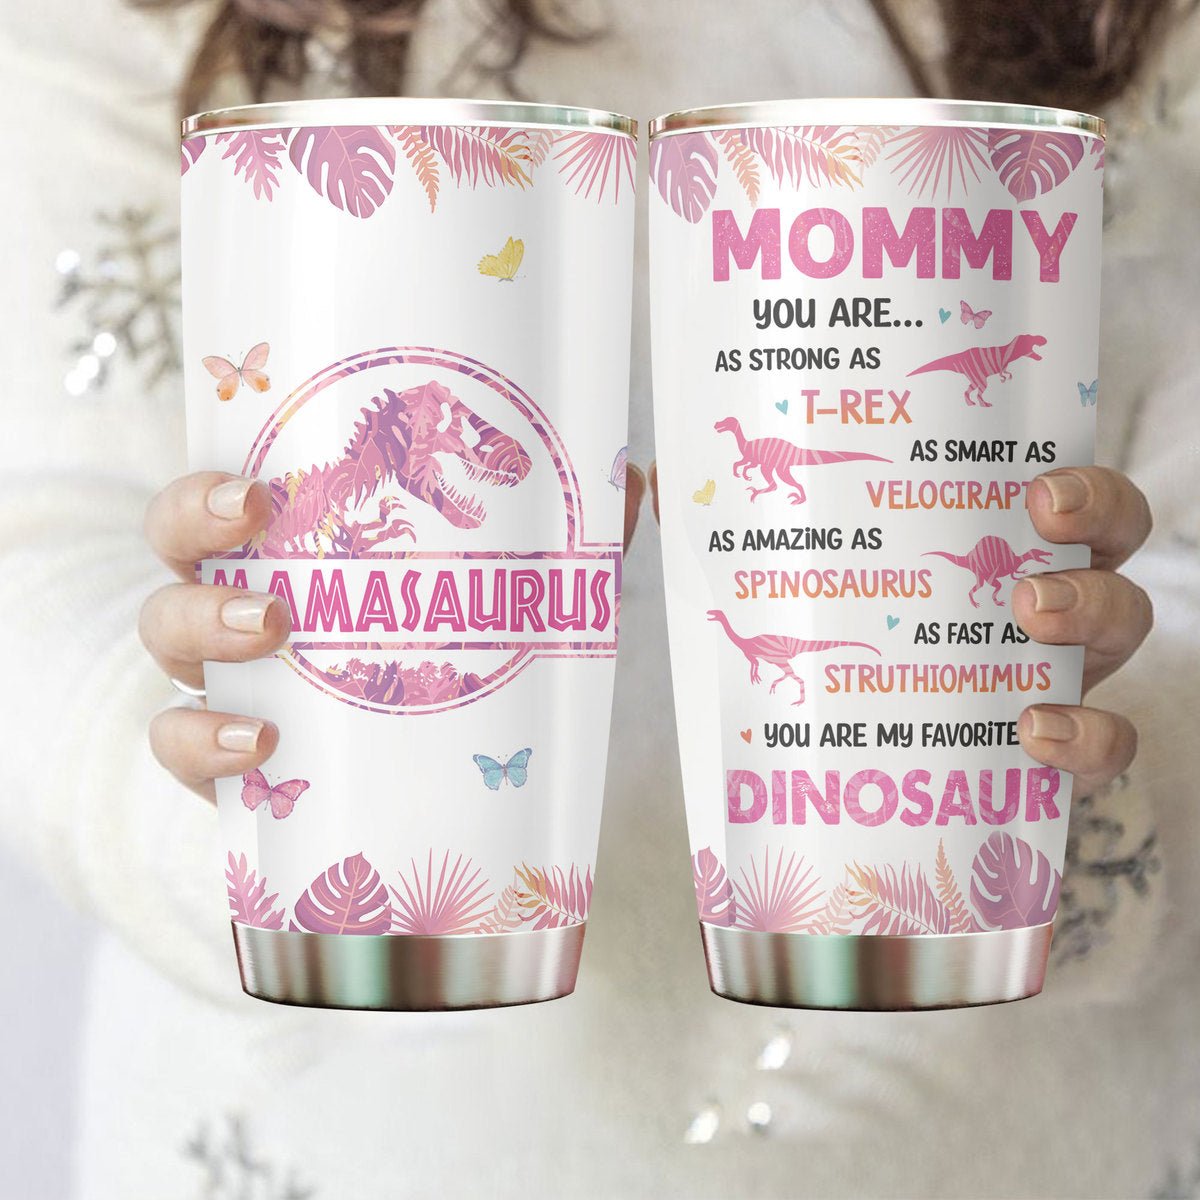 Pavo Mamasaurus Tumbler - Unique Birthday & Christmas Gifts For Women, Mom  Gifts from Daughter, Son,…See more Pavo Mamasaurus Tumbler - Unique